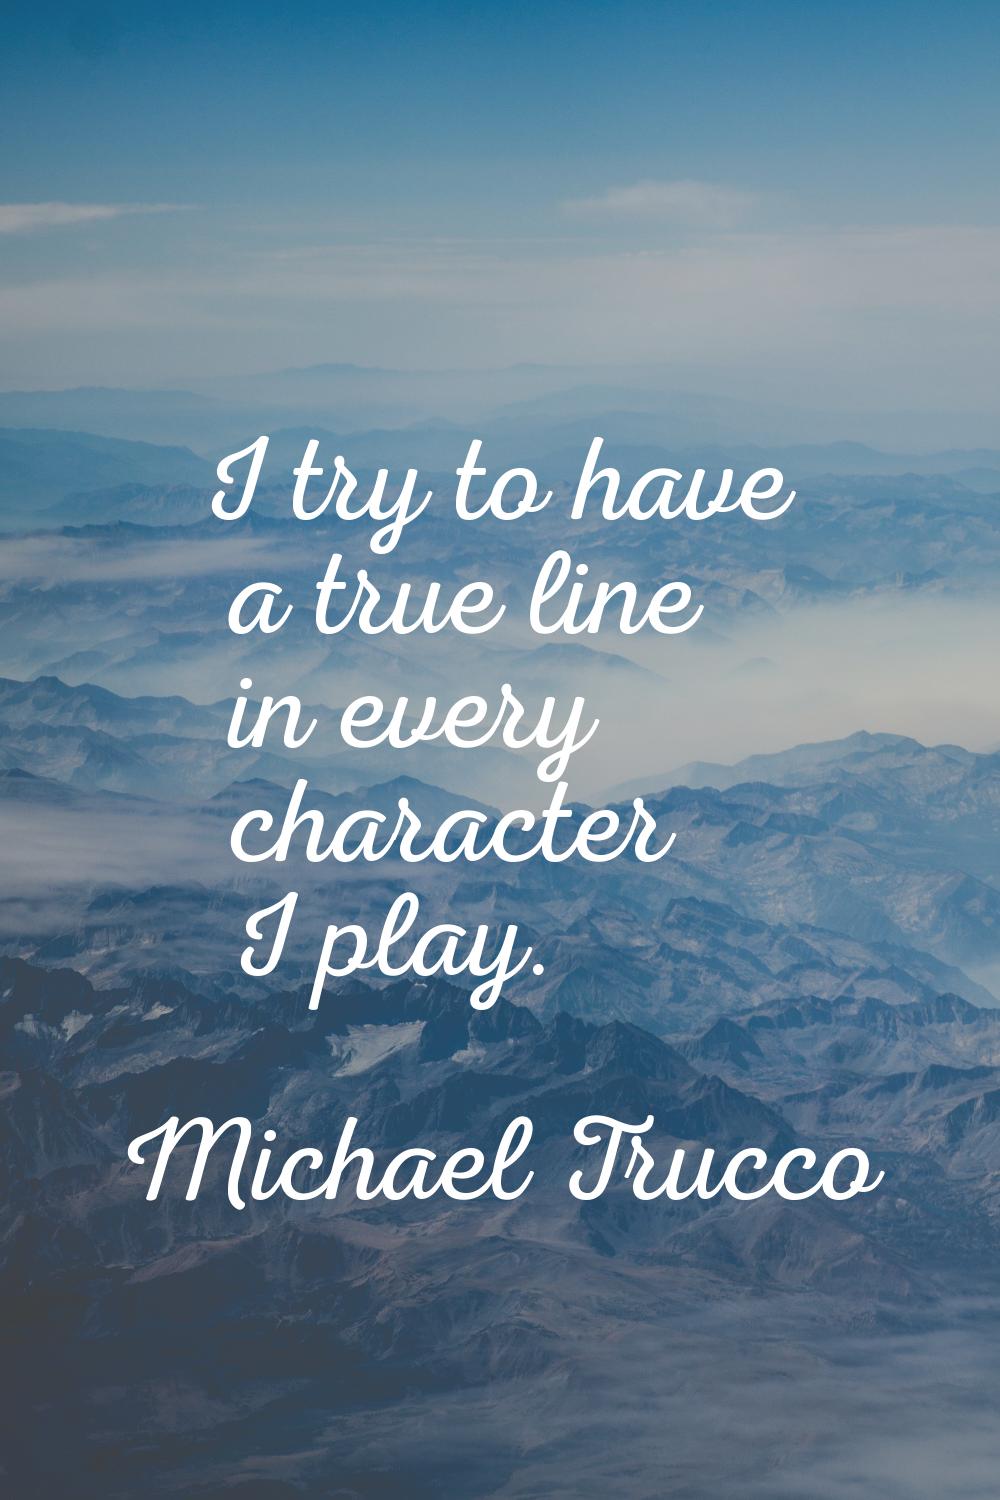 I try to have a true line in every character I play.